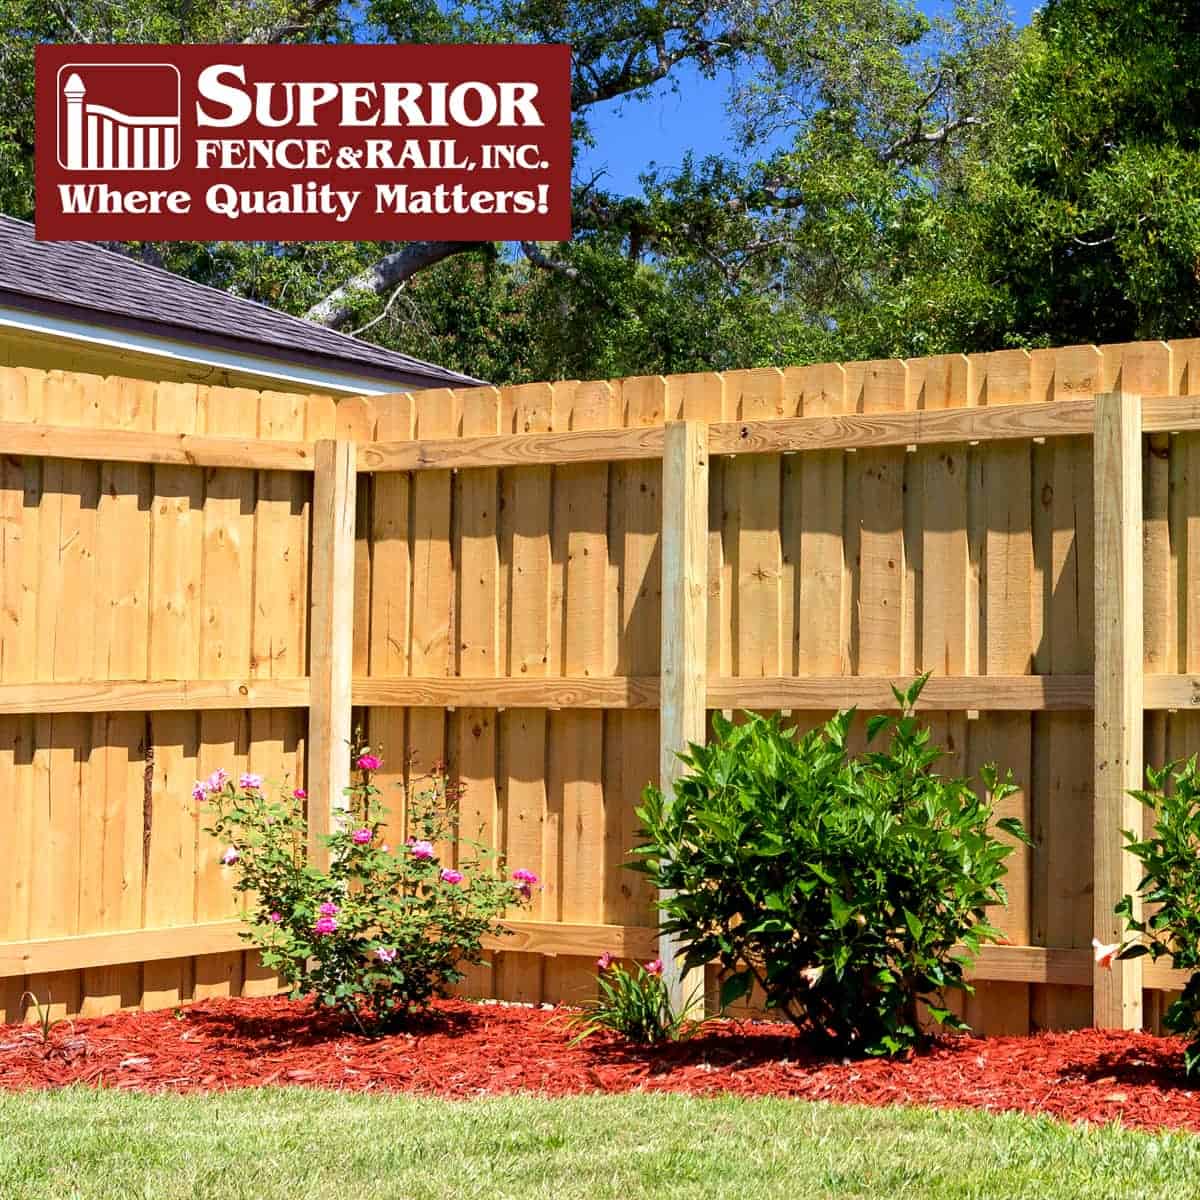 New Haven fence company contractor